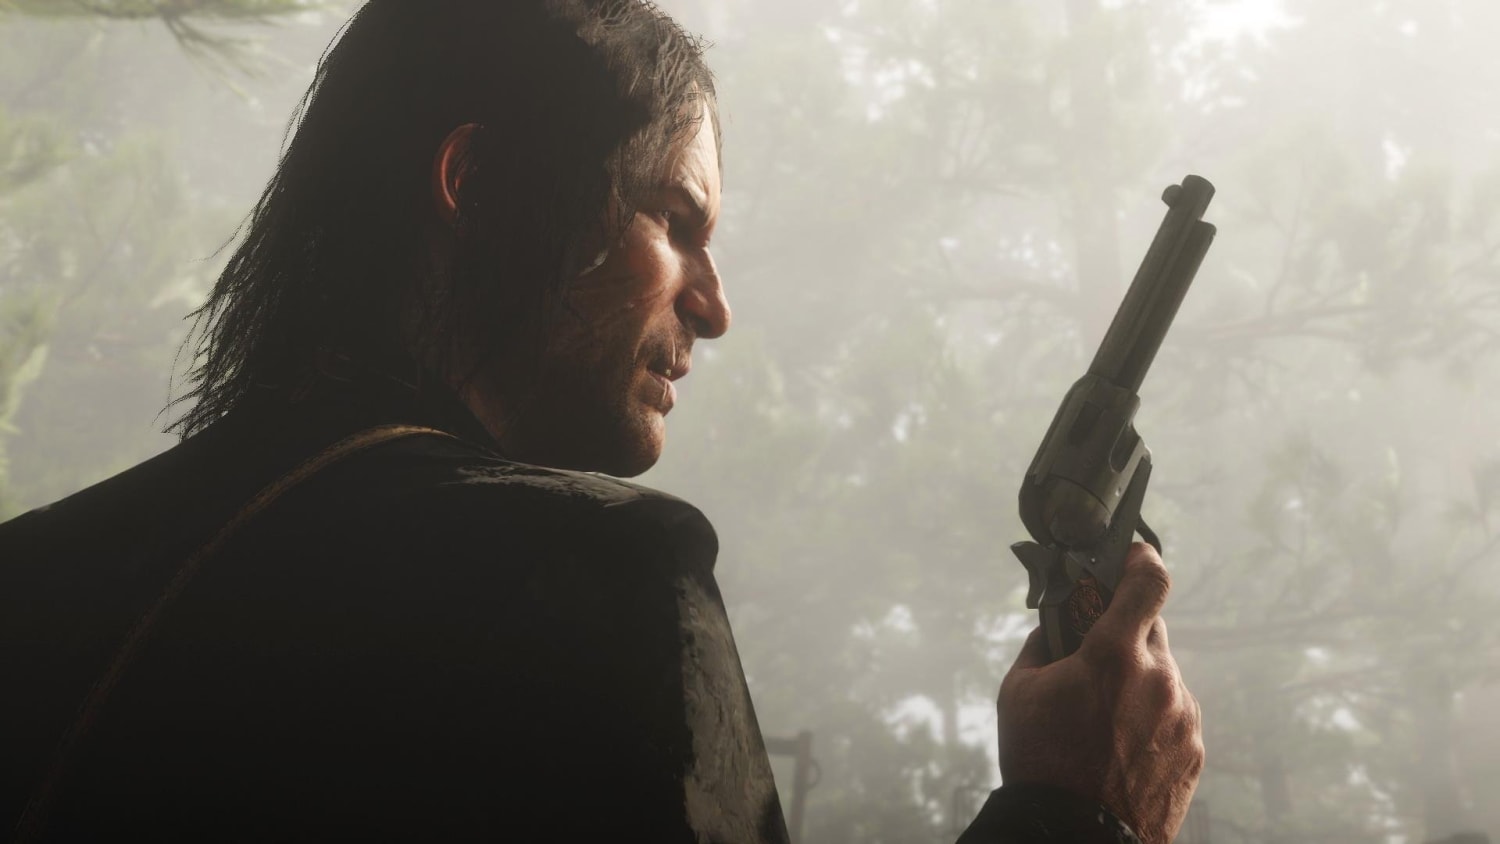 Online weapons and more in story mode at Red Dead Redemption 2